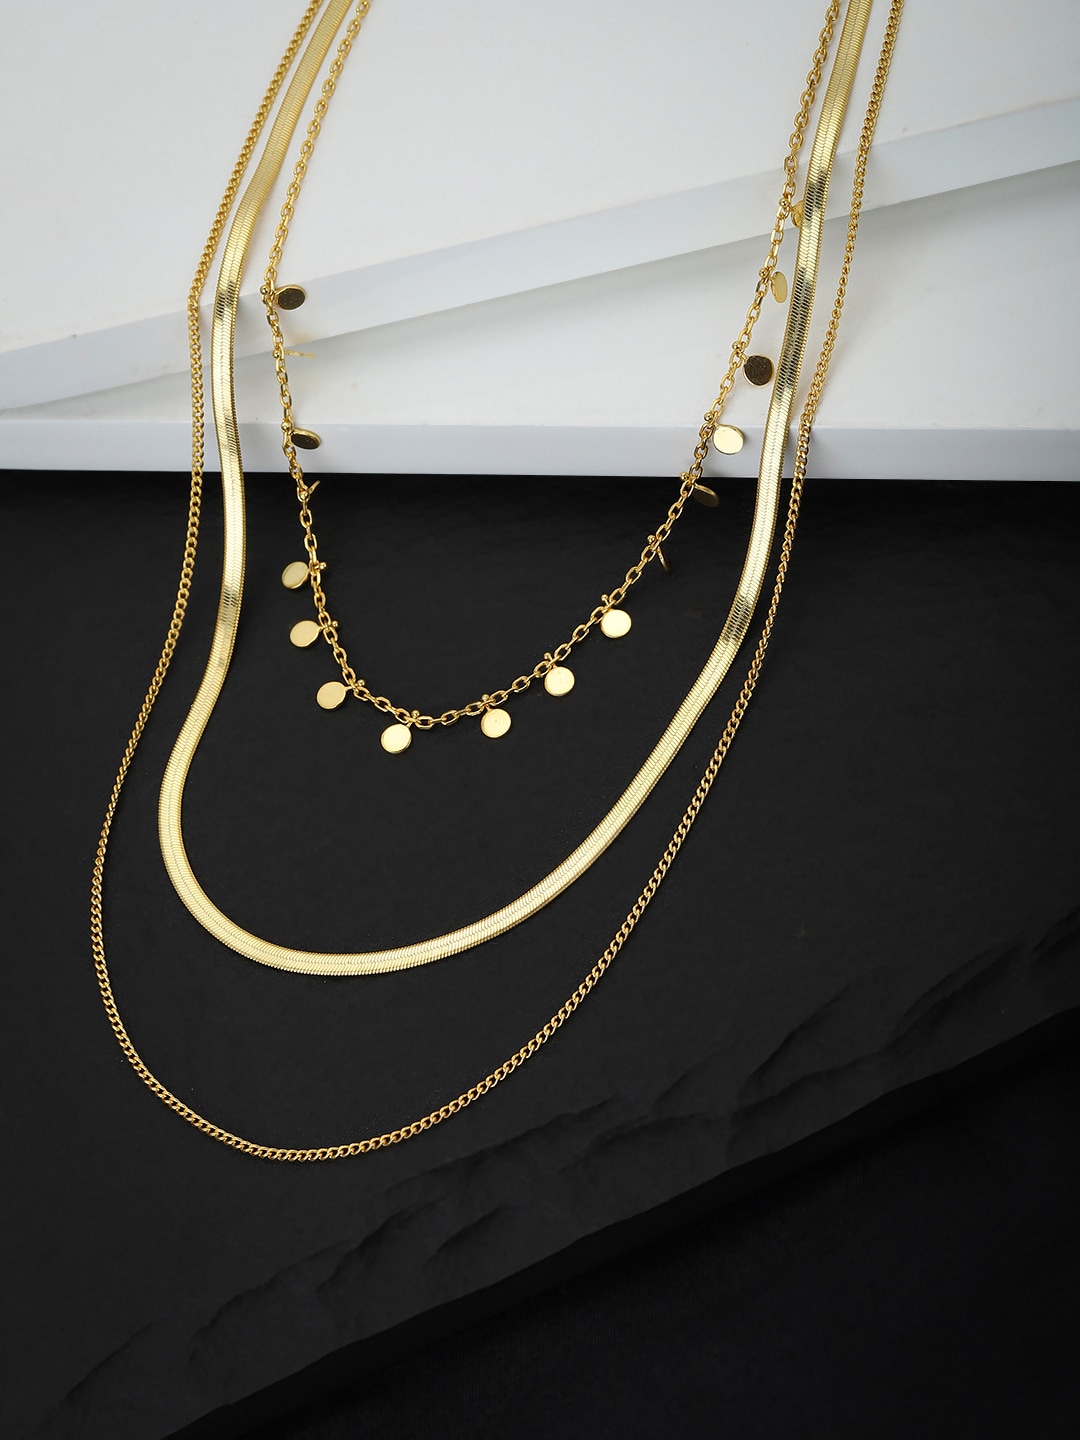 Carlton London Gold-Toned Brass Gold-Plated Layered Necklace Price in India